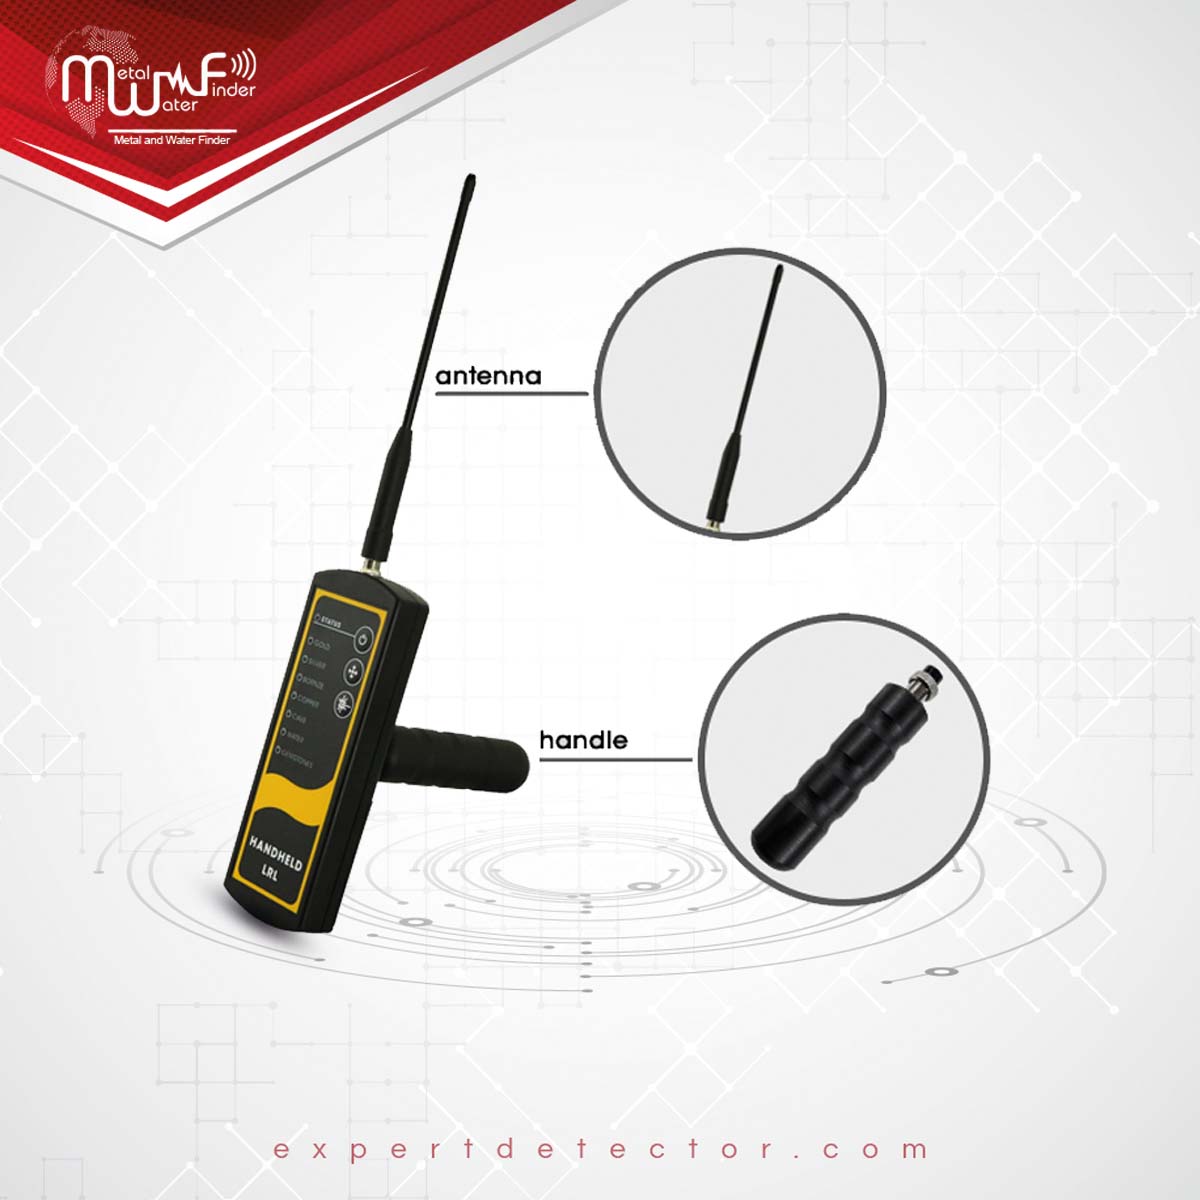 MF 1200 Active gold detector